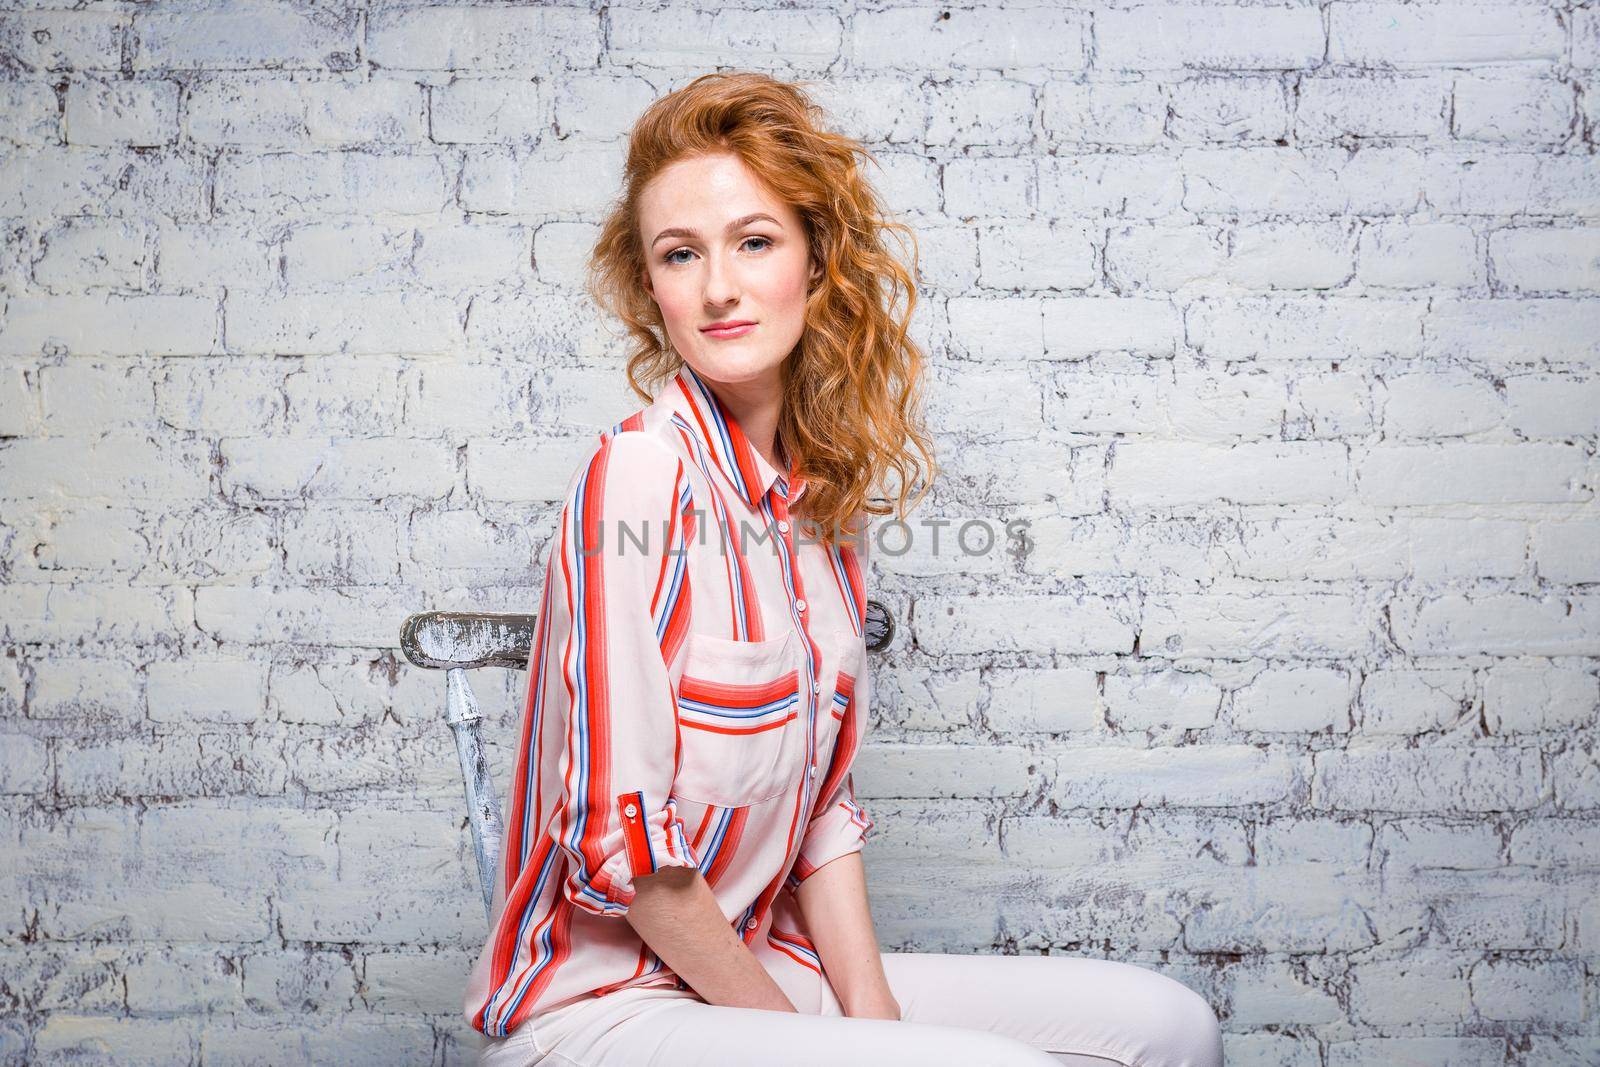 portrait Beautiful young woman student with red curly hair and freckles on her face sitting on a wooden chair on a brick wall background in gray. Dressed in a red striped shirt.